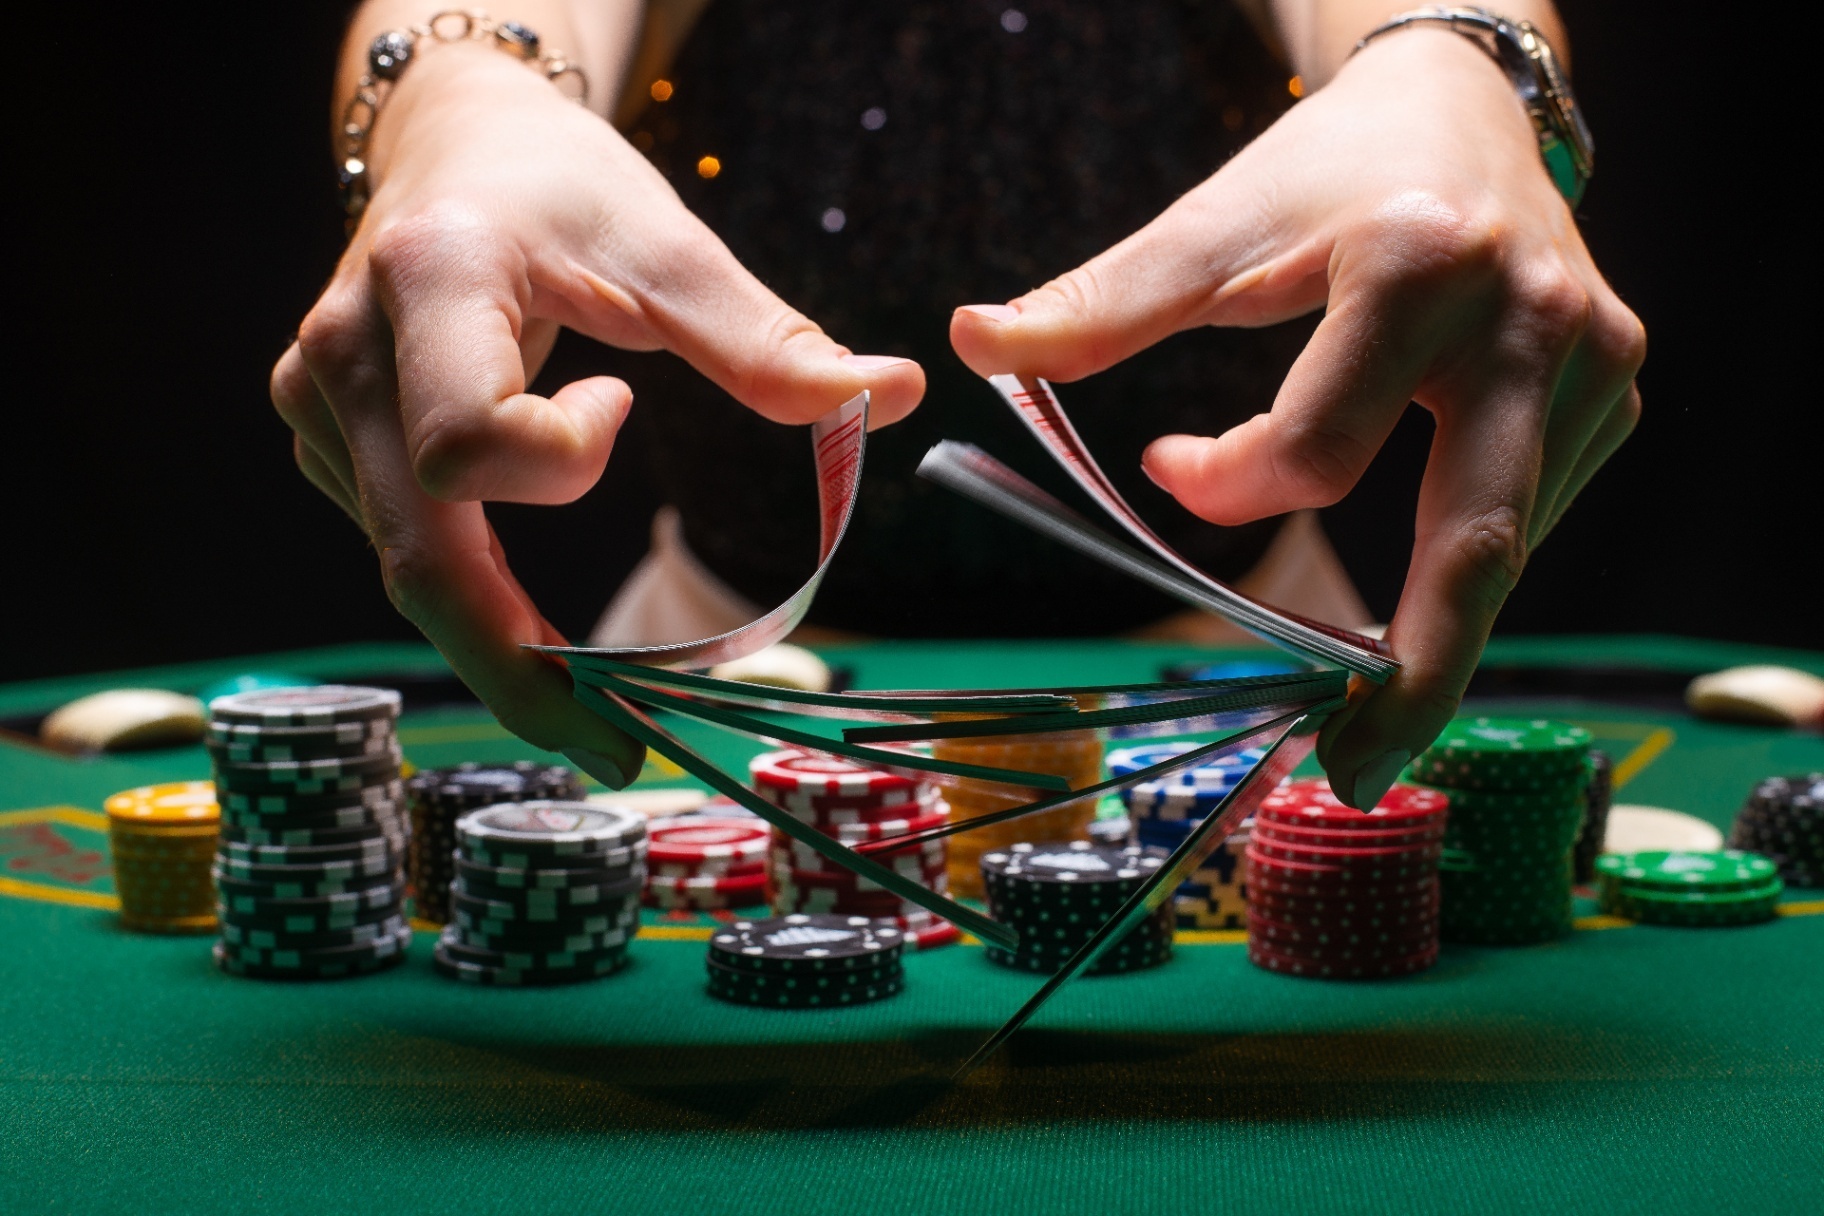 A close up of hands shuffling a deck of cards over a poker table. An addiction therapist in Palm Beach, FL can offer support with many types of addiction in Palm Beach, FL. Learn more about addiction counseling in Miami, FL and how we can help you find support today. 